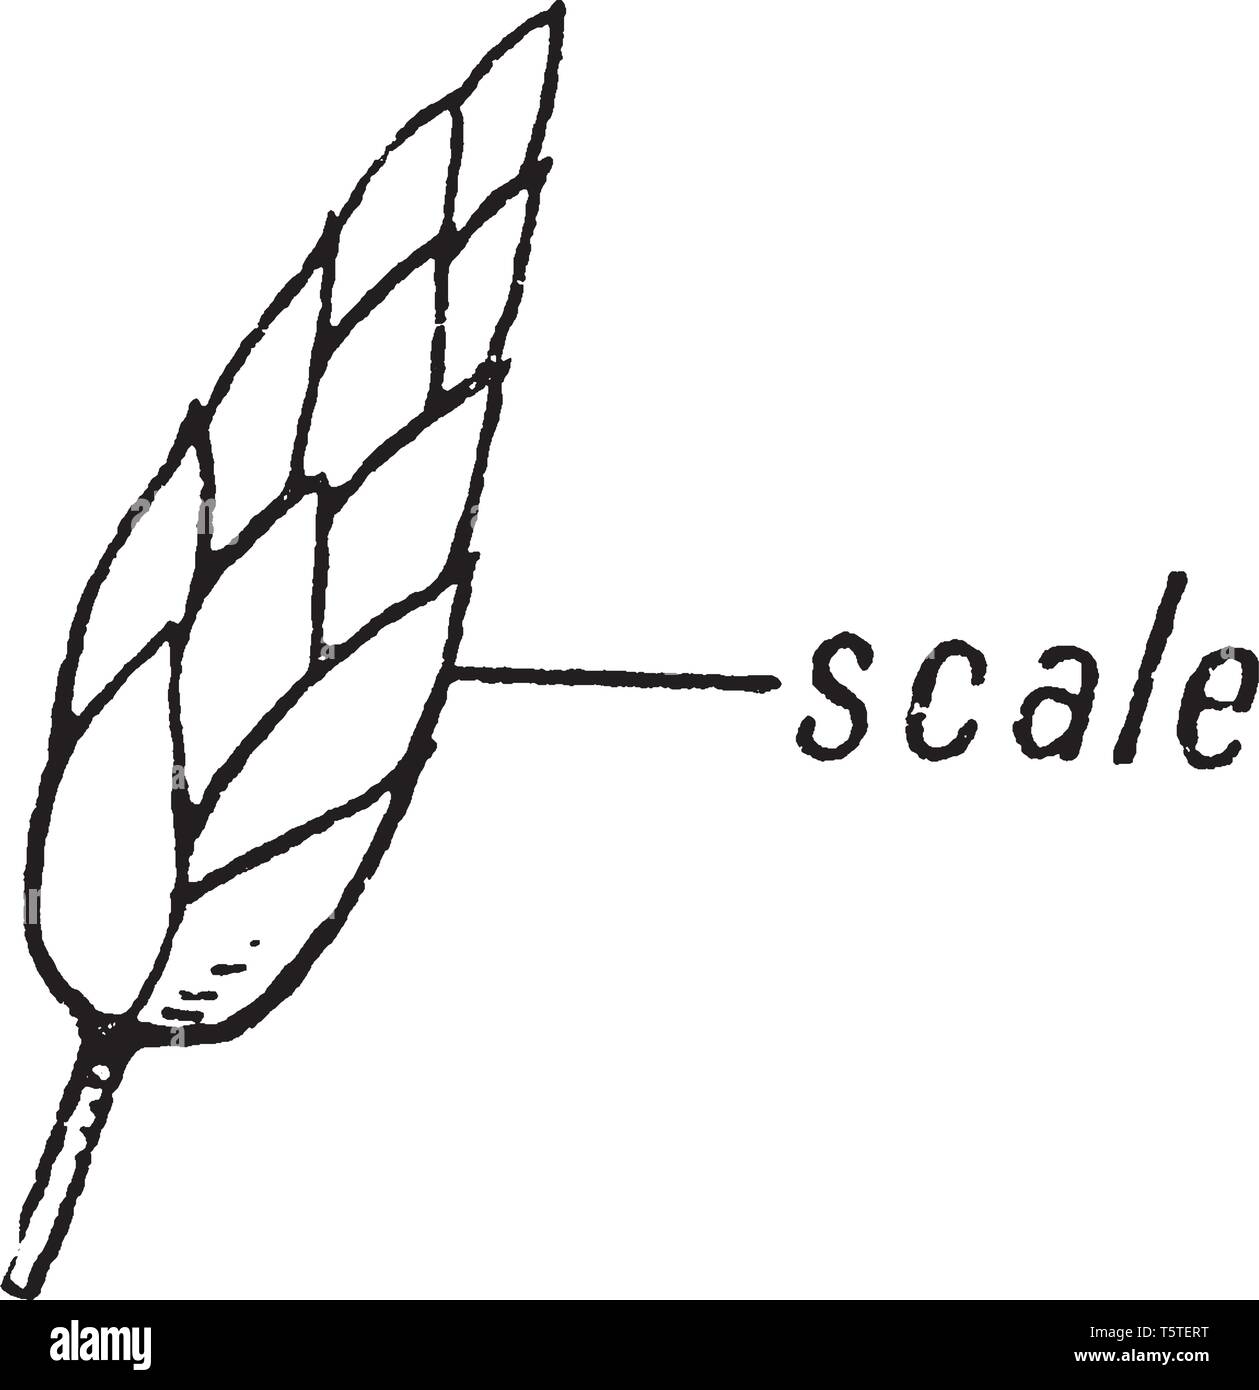 Picture shows the spikelet part of Sedge morphology plant. It shows the scale part of a spikelet. Sedge morphology has spikelet like structures, inter Stock Vector